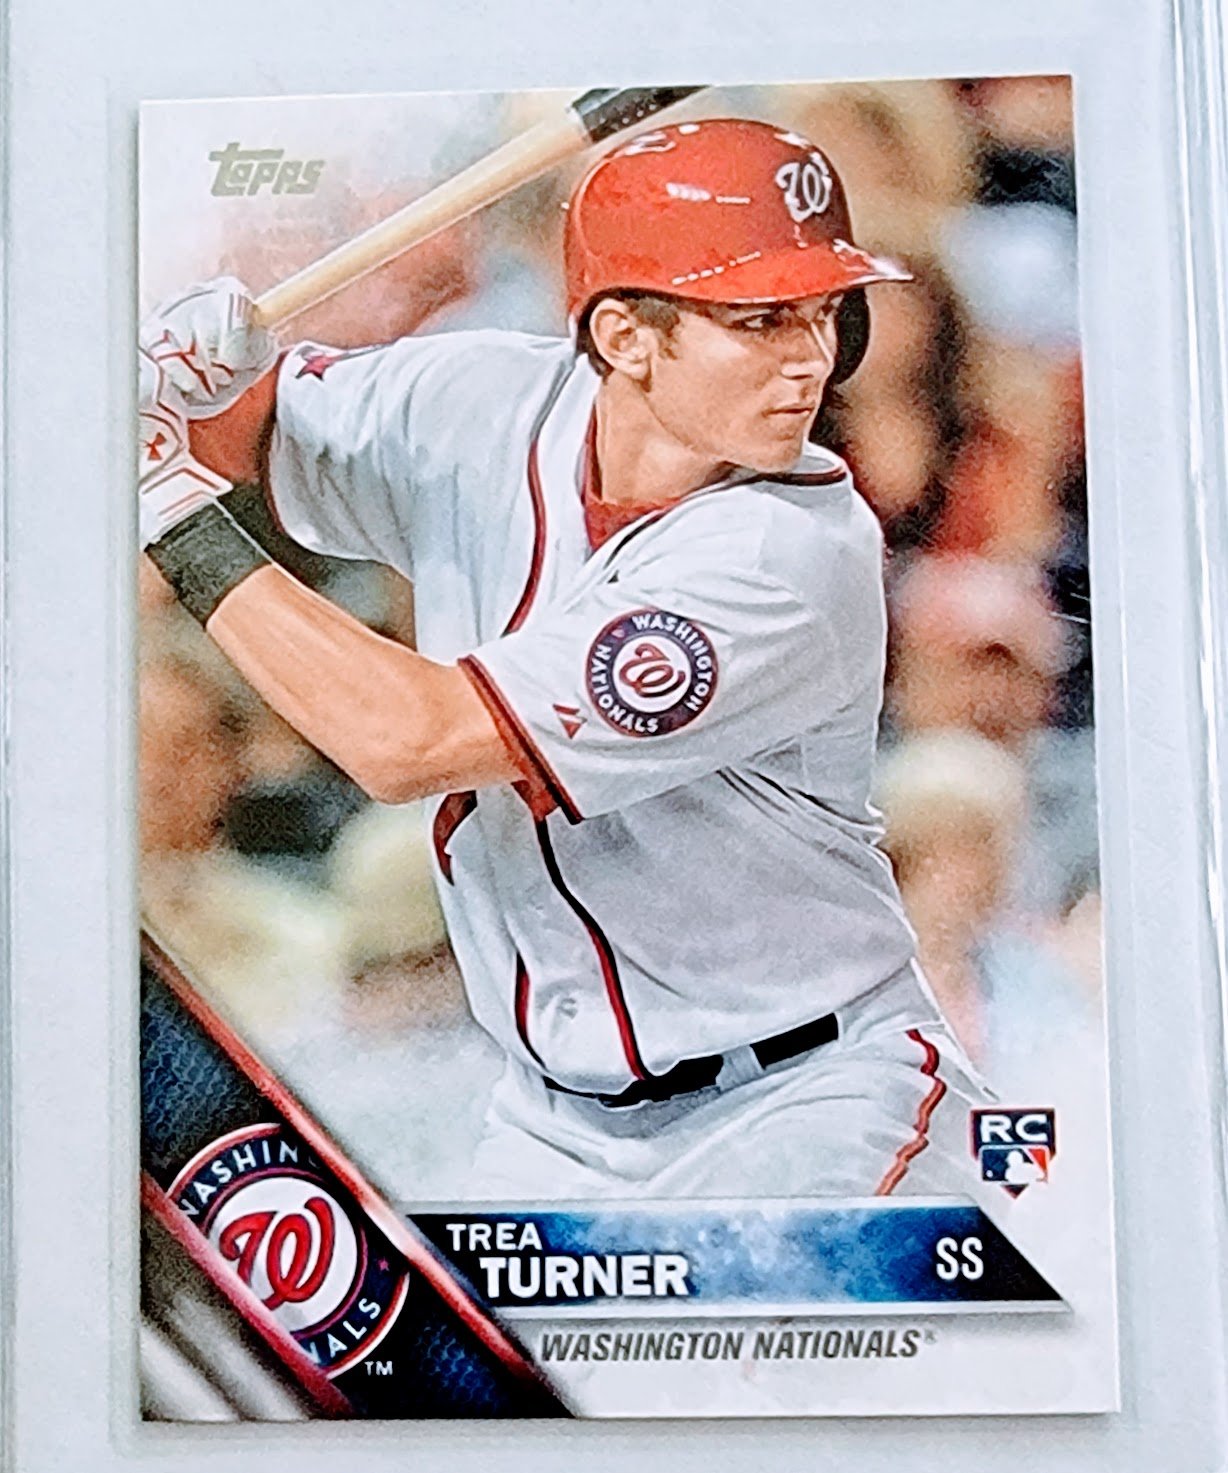 2016 Topps Trea Turner Rookie Baseball Card TPTV simple Xclusive Collectibles   